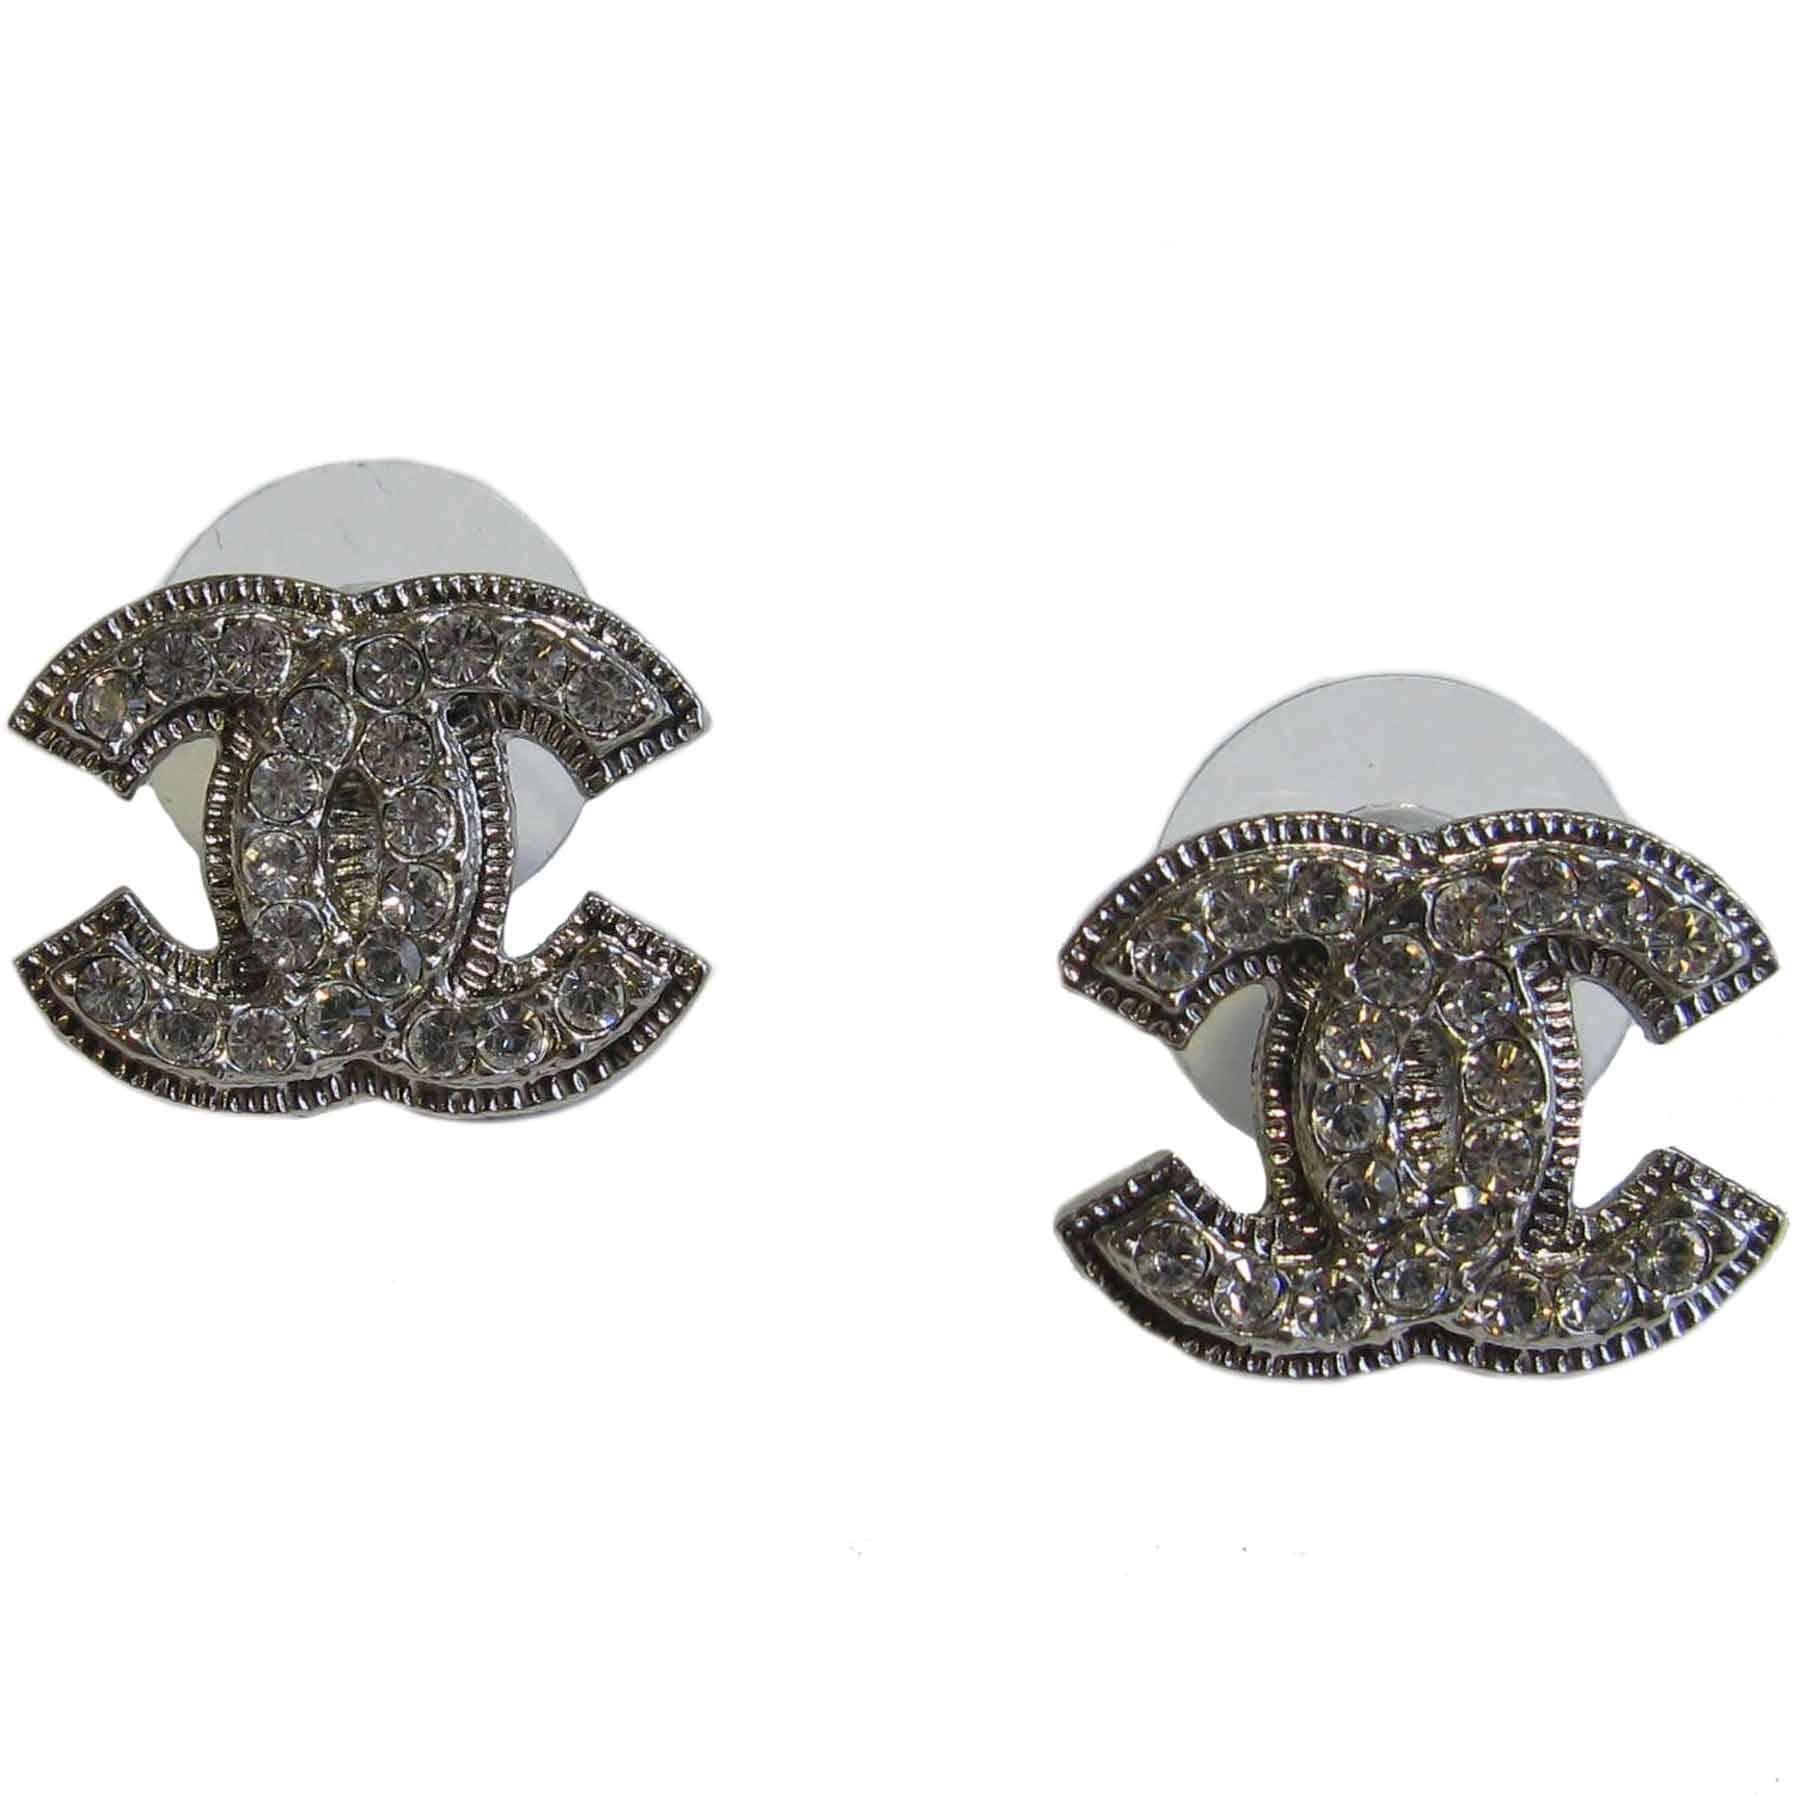 Chanel Earrings in Rhinestones and Silver Plated Metal